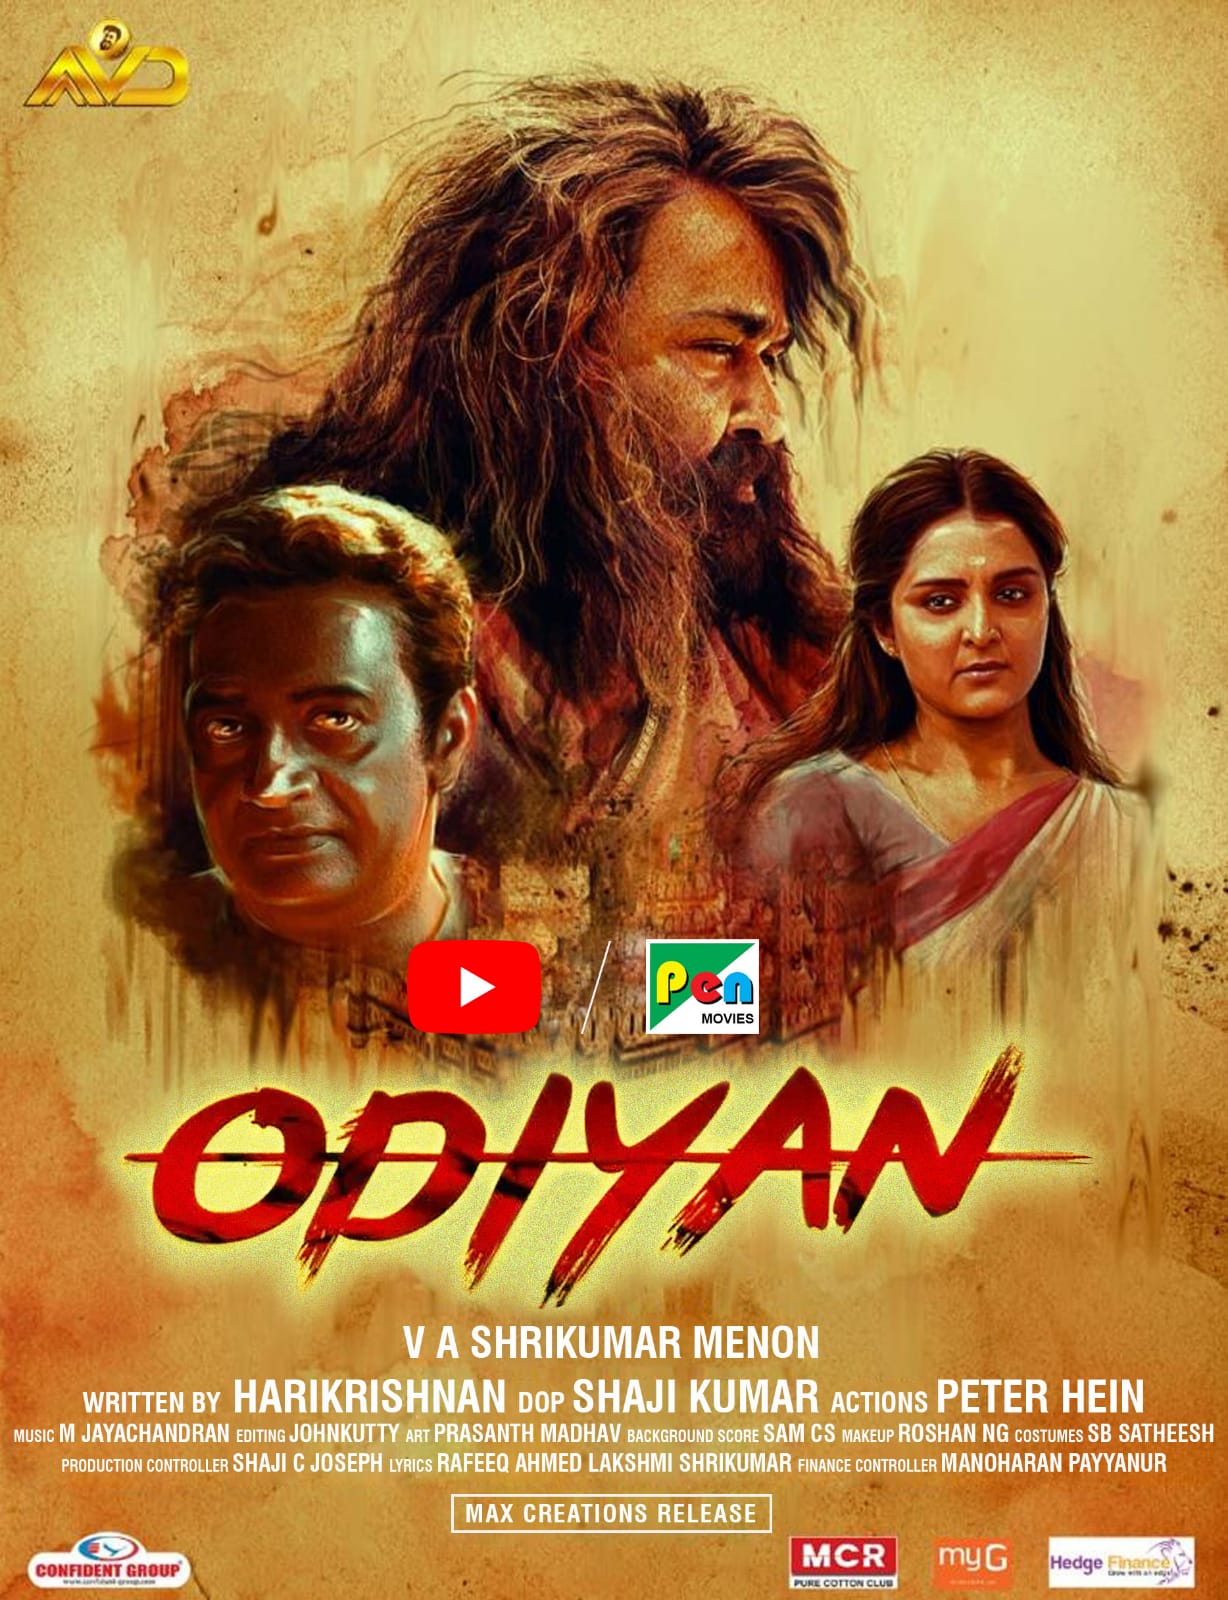 Mohanlal's Odiyan crosses 6 million within 8 days of its release in India and makes history